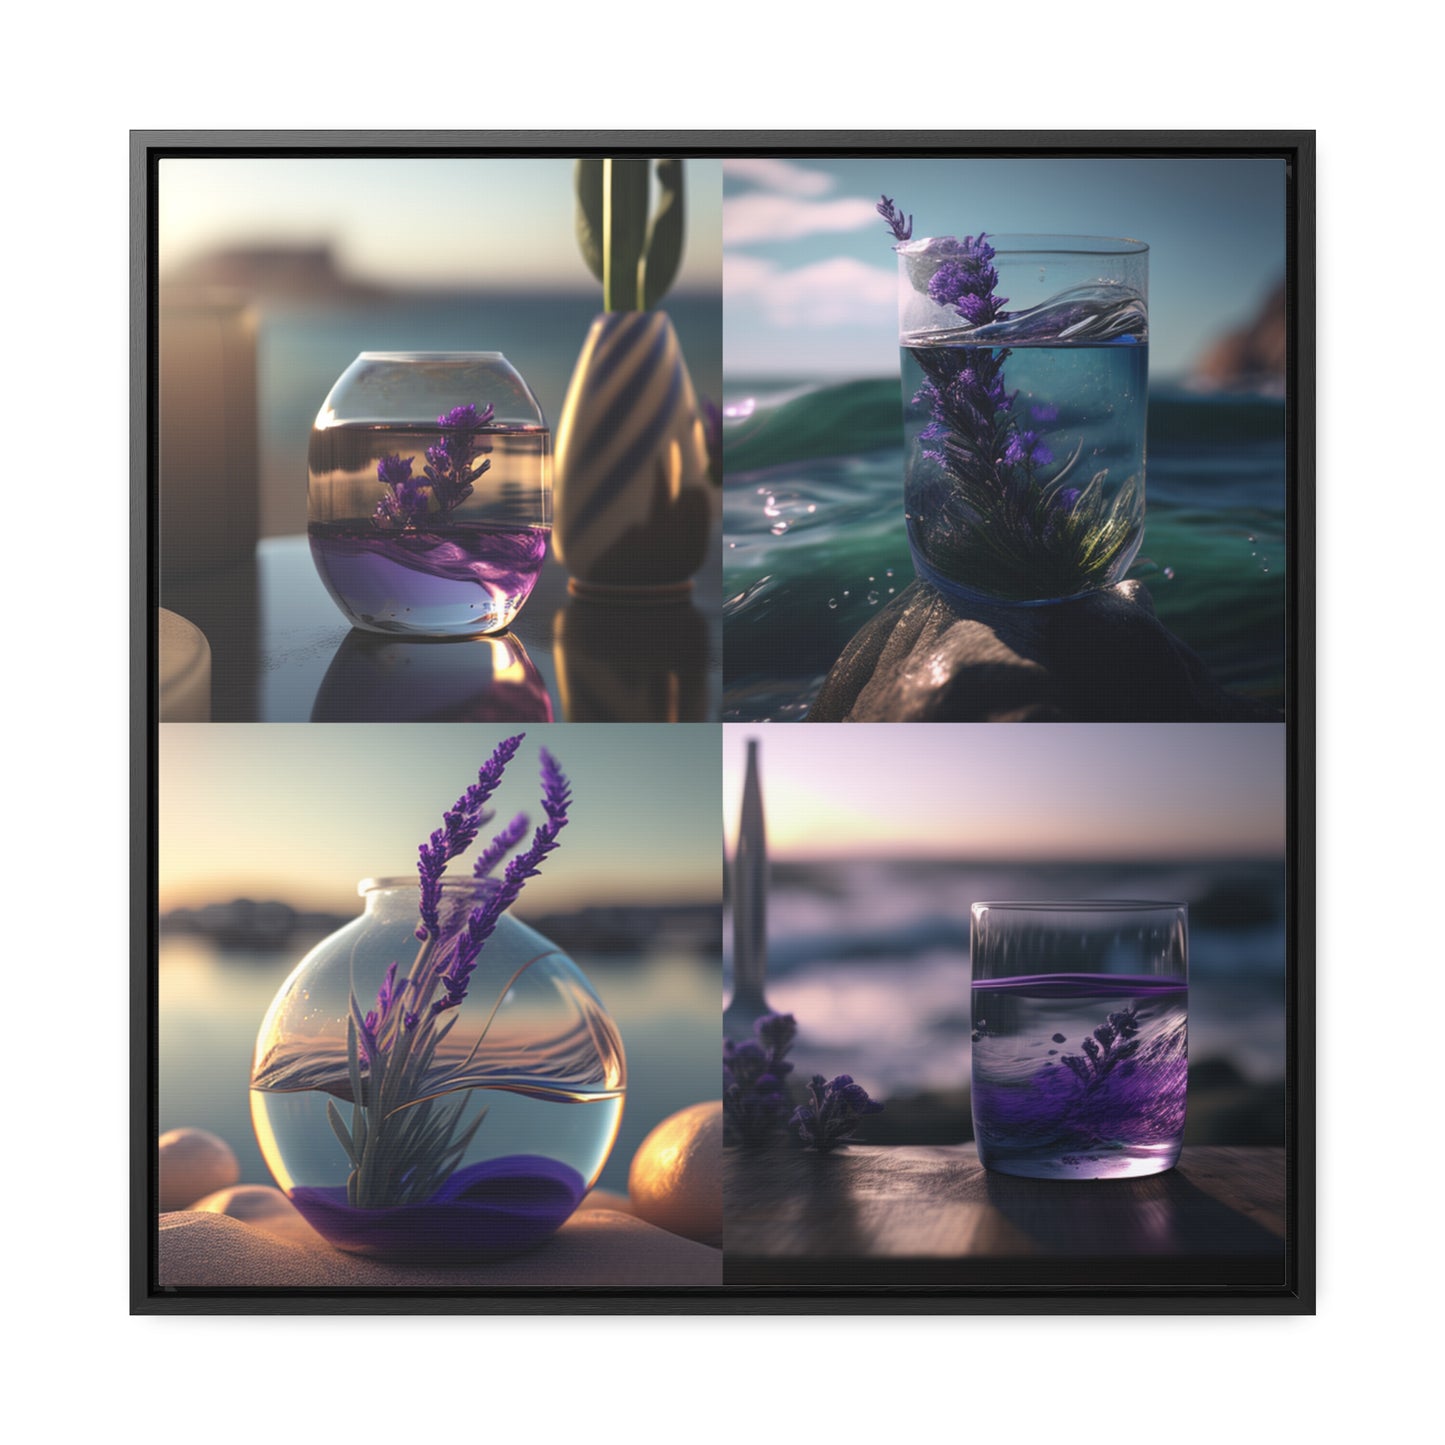 Gallery Canvas Wraps, Square Frame Lavender in a vase 5